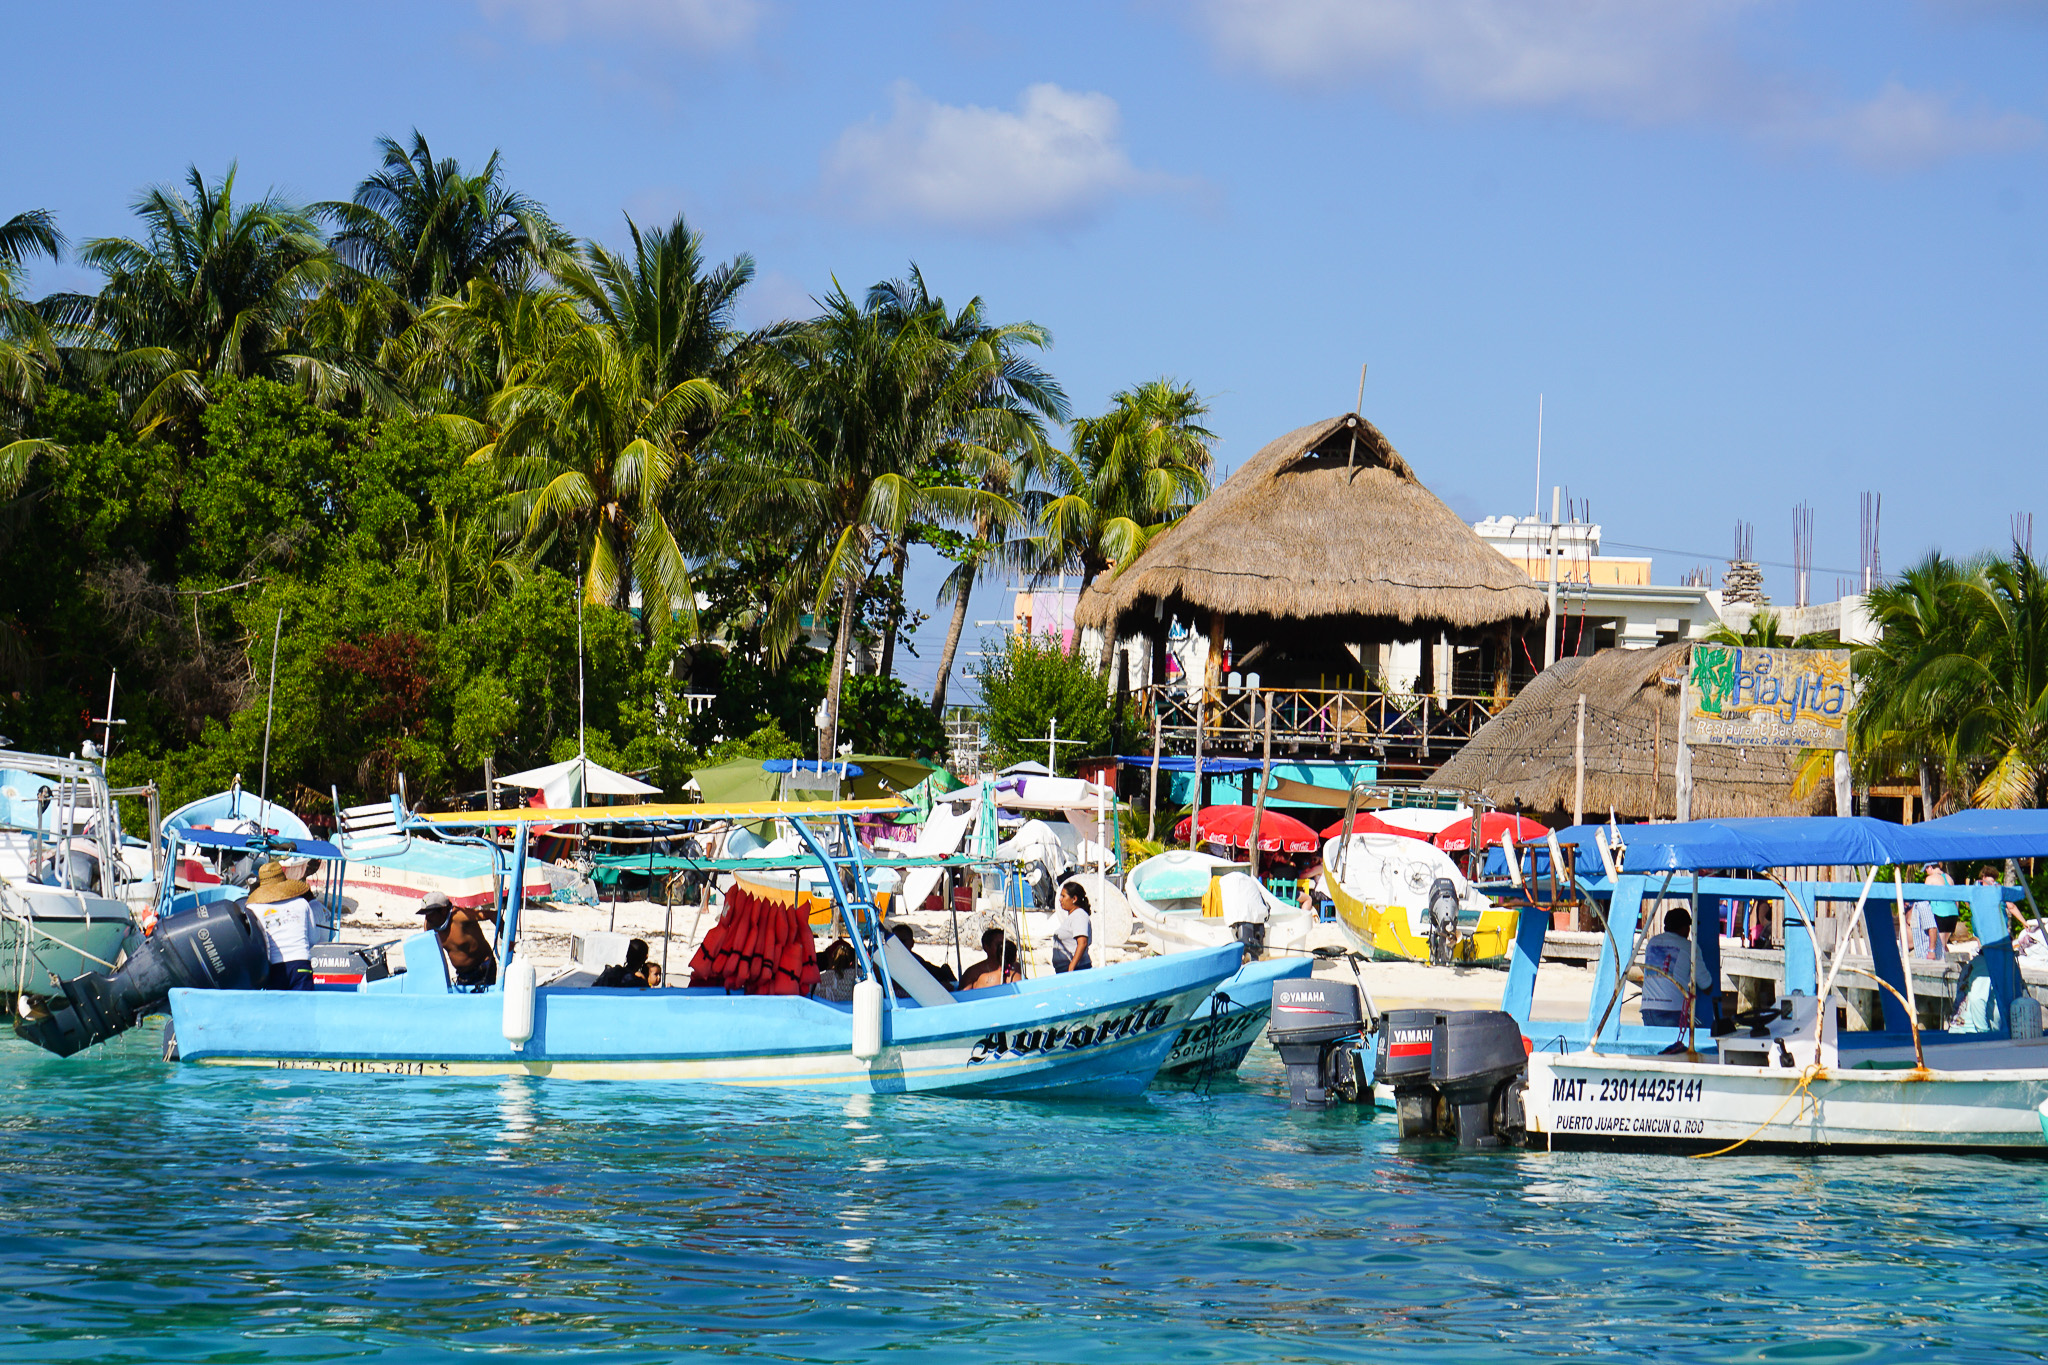 Top things to do on Isla Mujeres -  - your guide to the world's  resorts